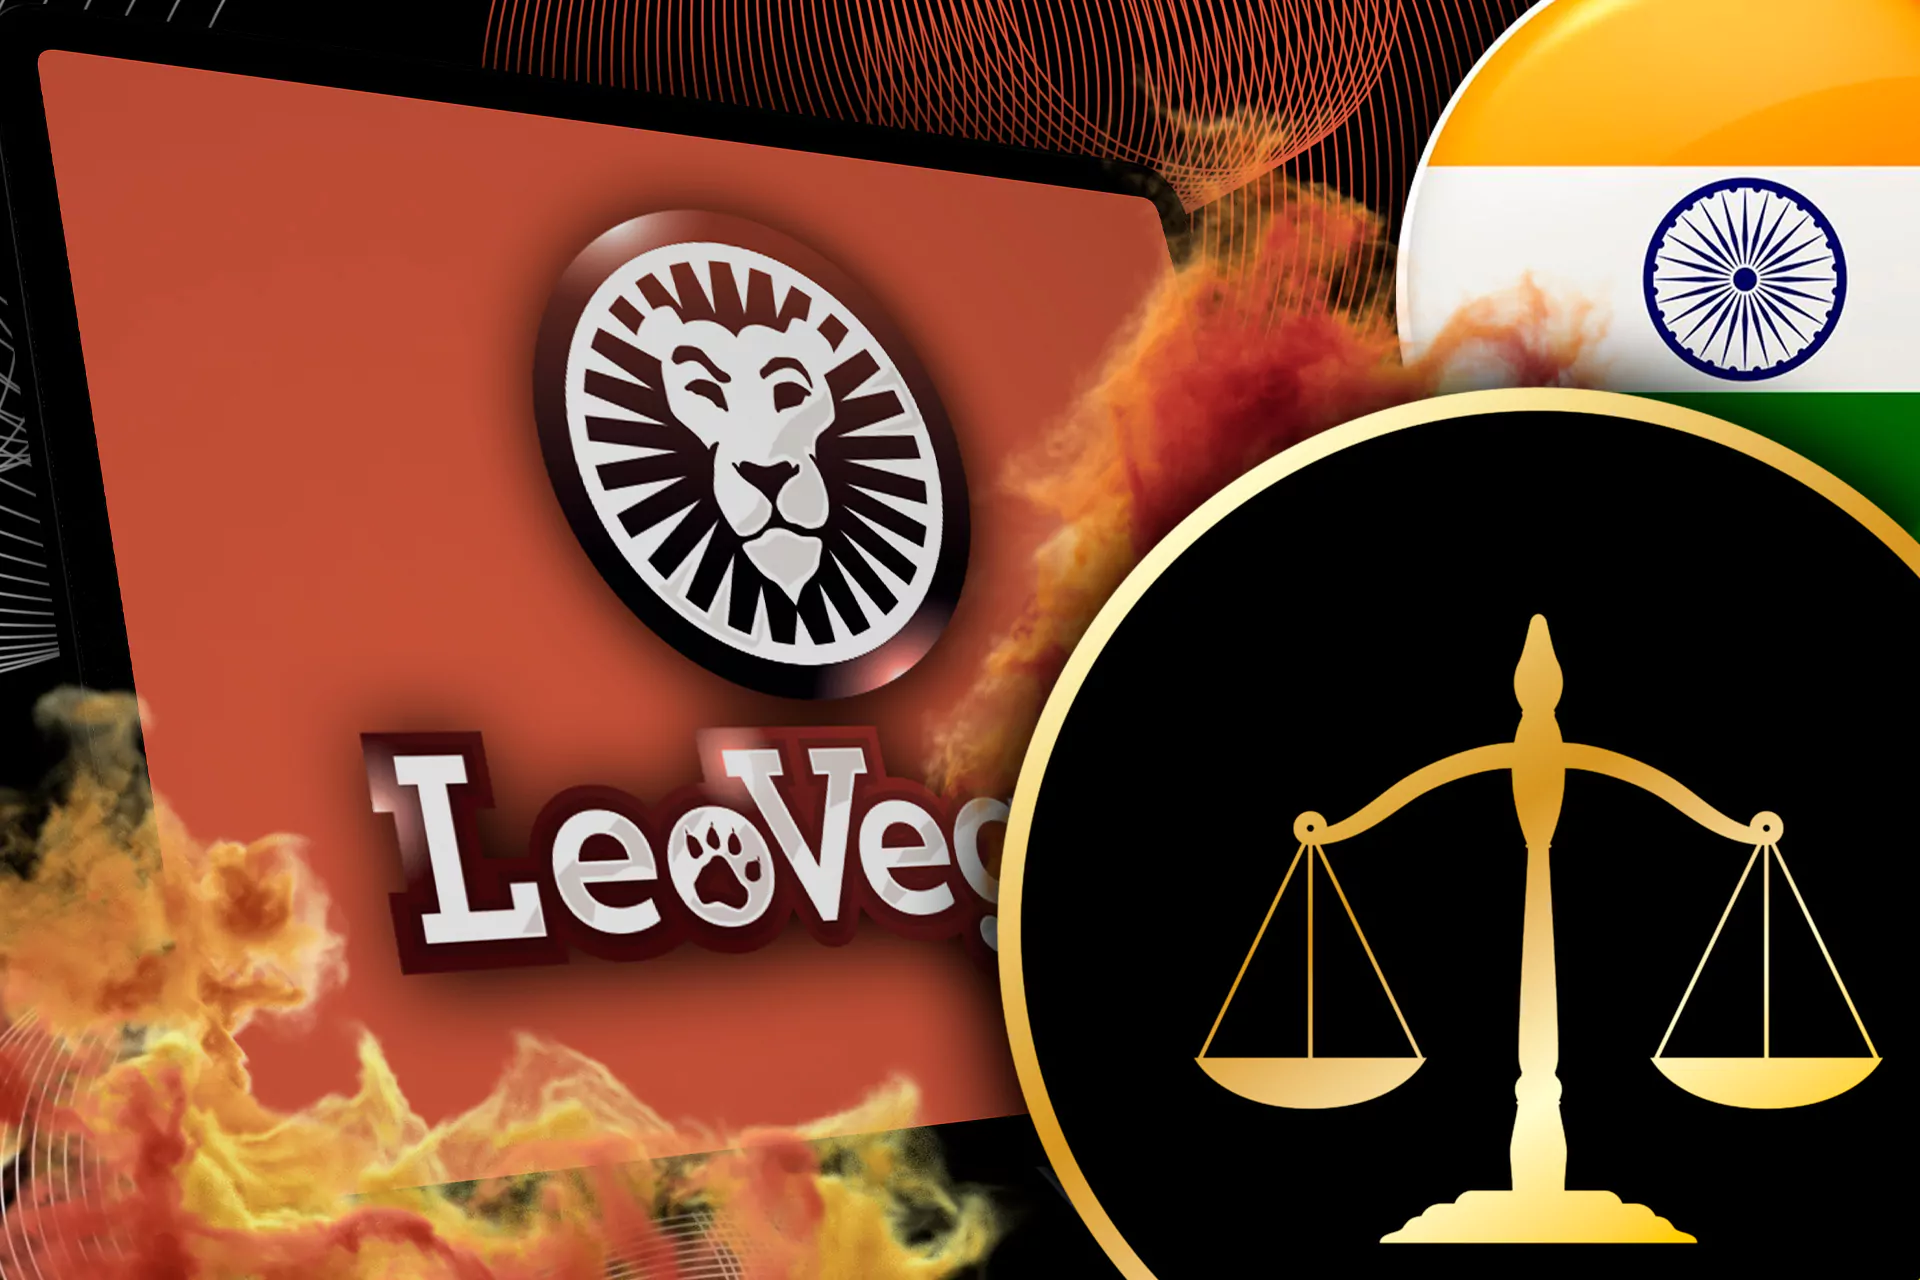 Leovegas is absolutely legal in India.